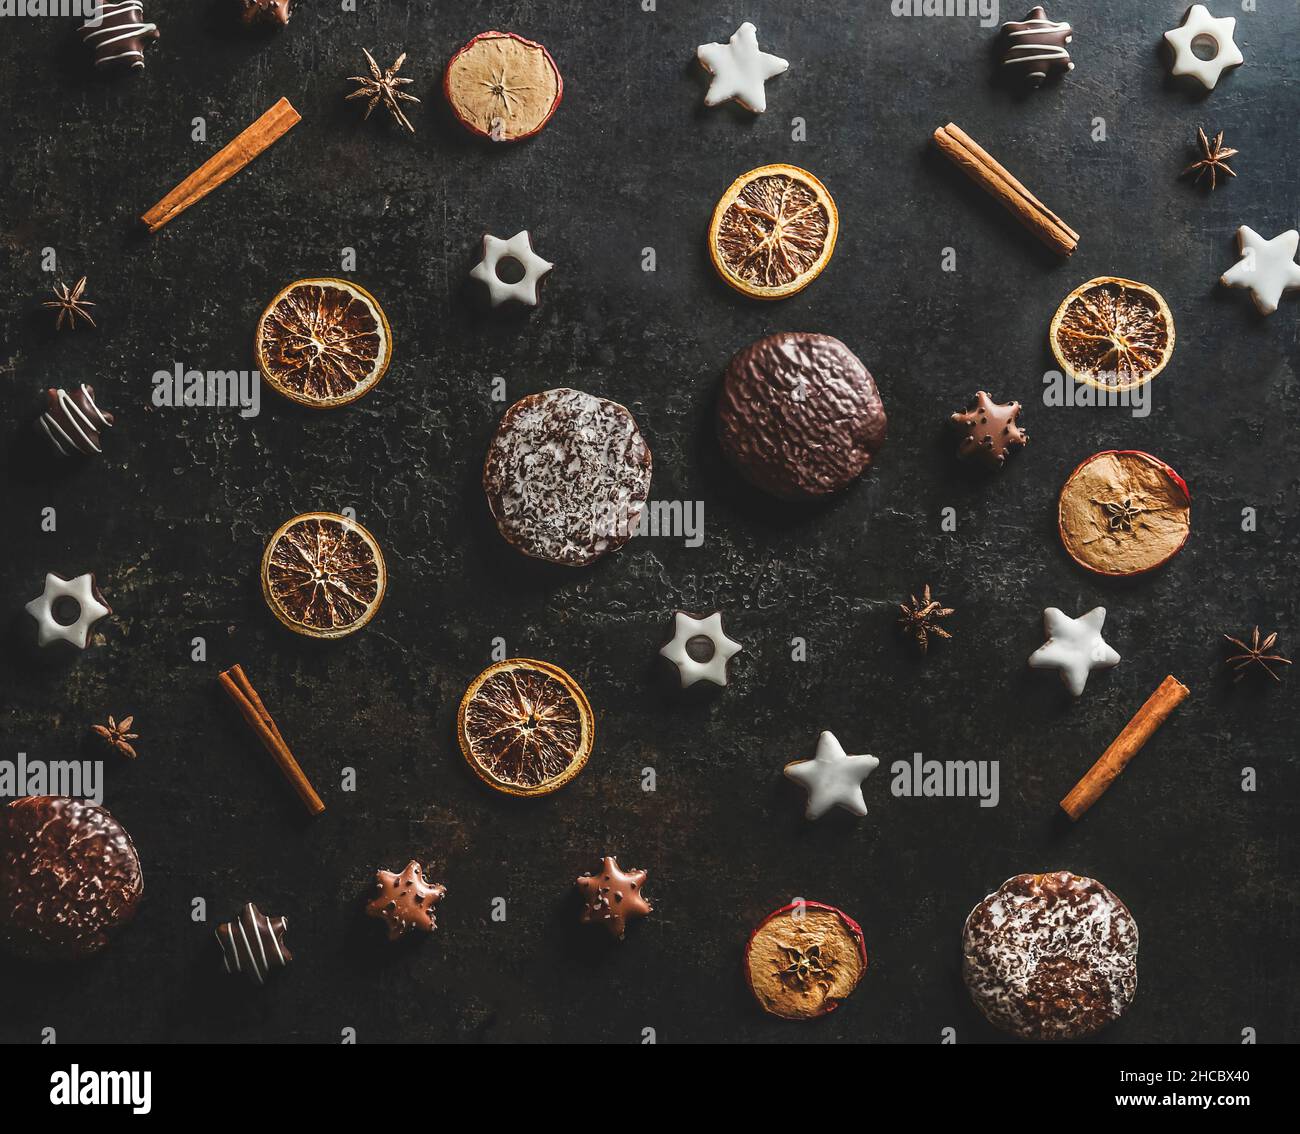 Christmas pattern made with dried orange, cinnamon sticks, gingerbread and Christmas cookies on dark kitchen table background. Top view. Stock Photo